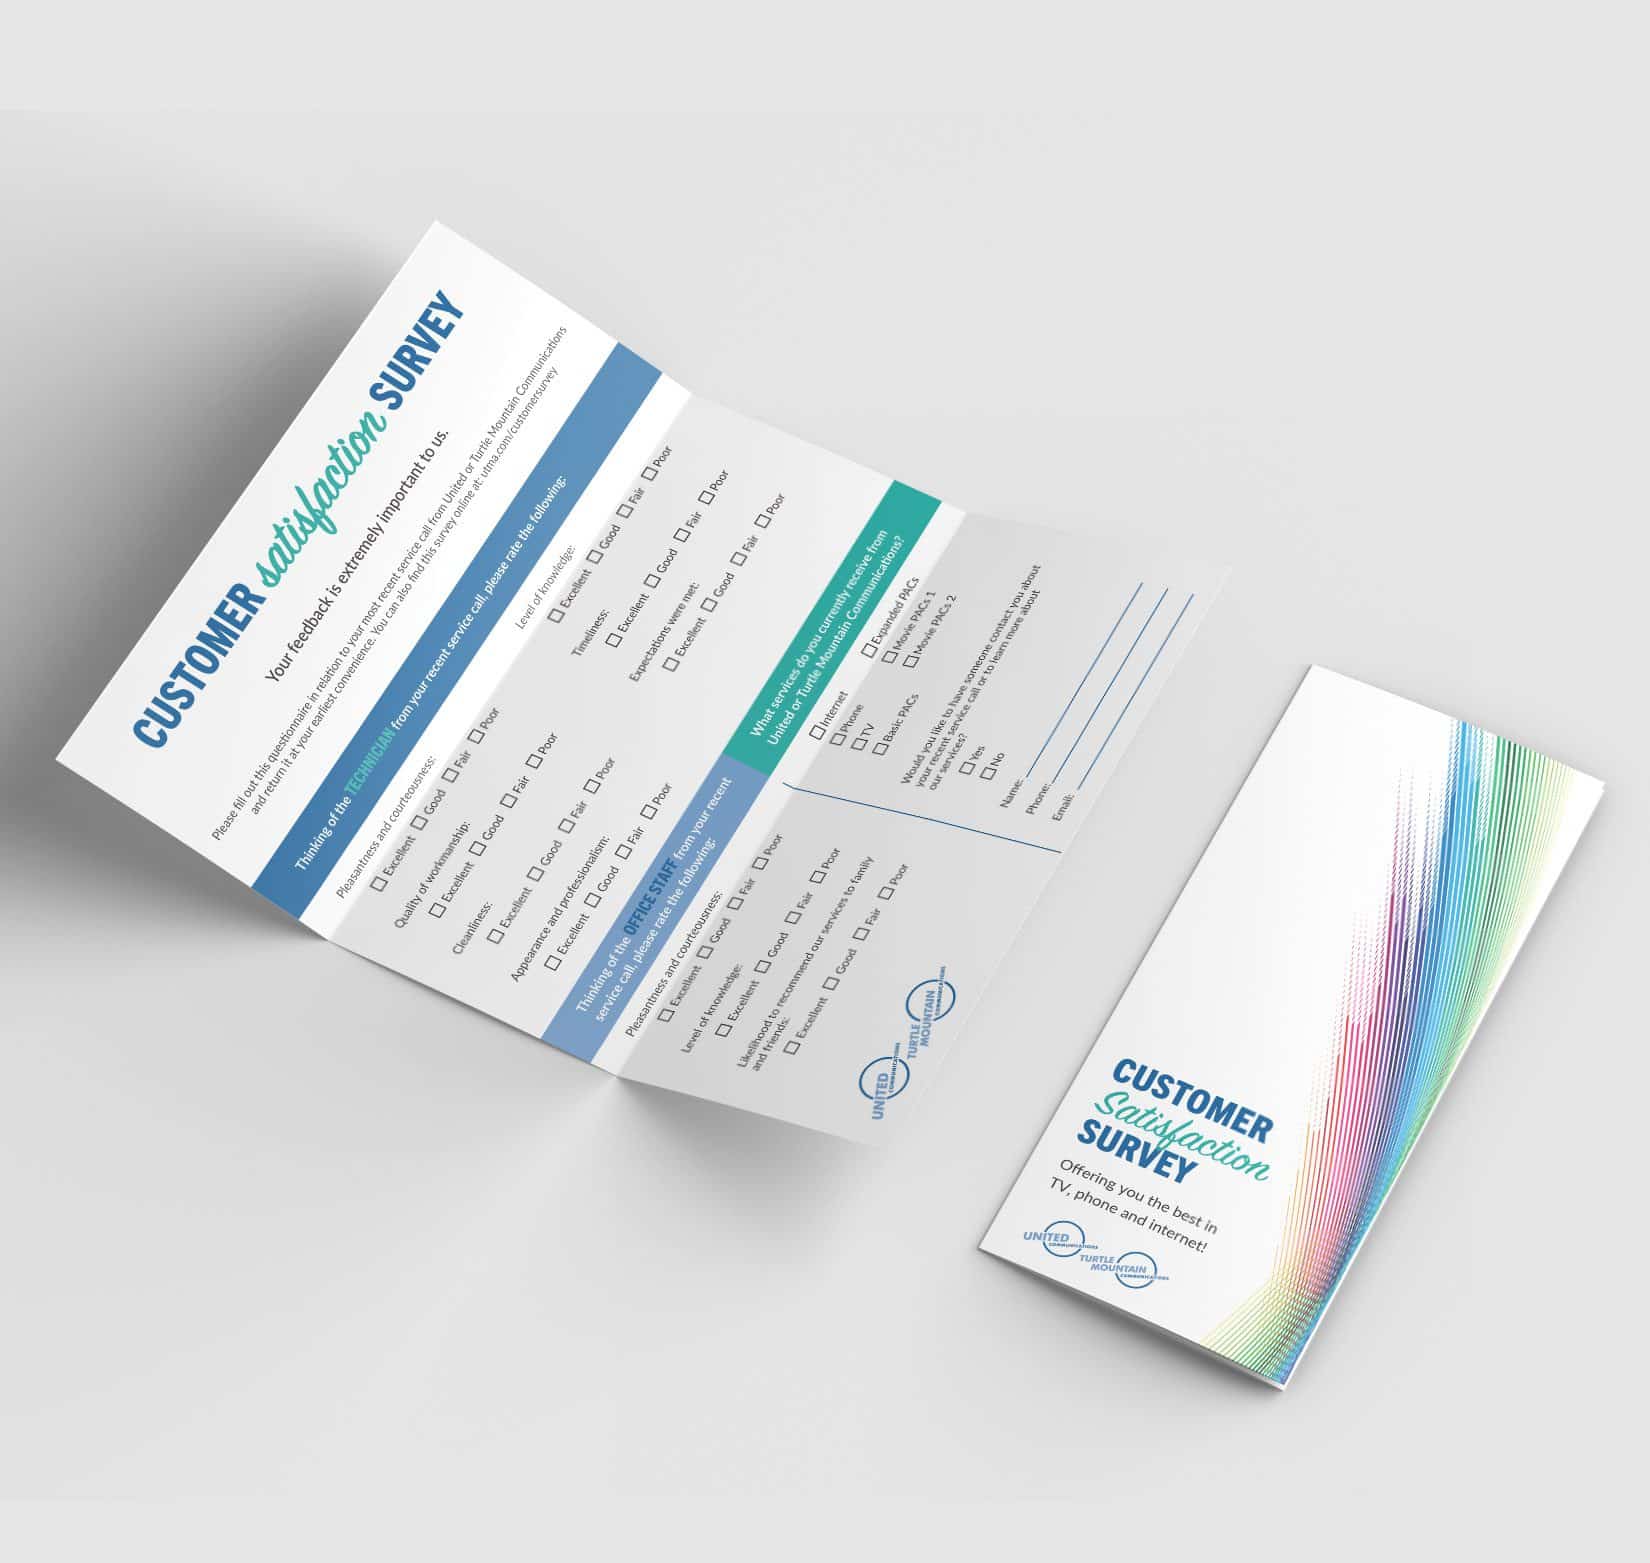 A designed and printed tri-fold customer satisfaction survey for United Communications